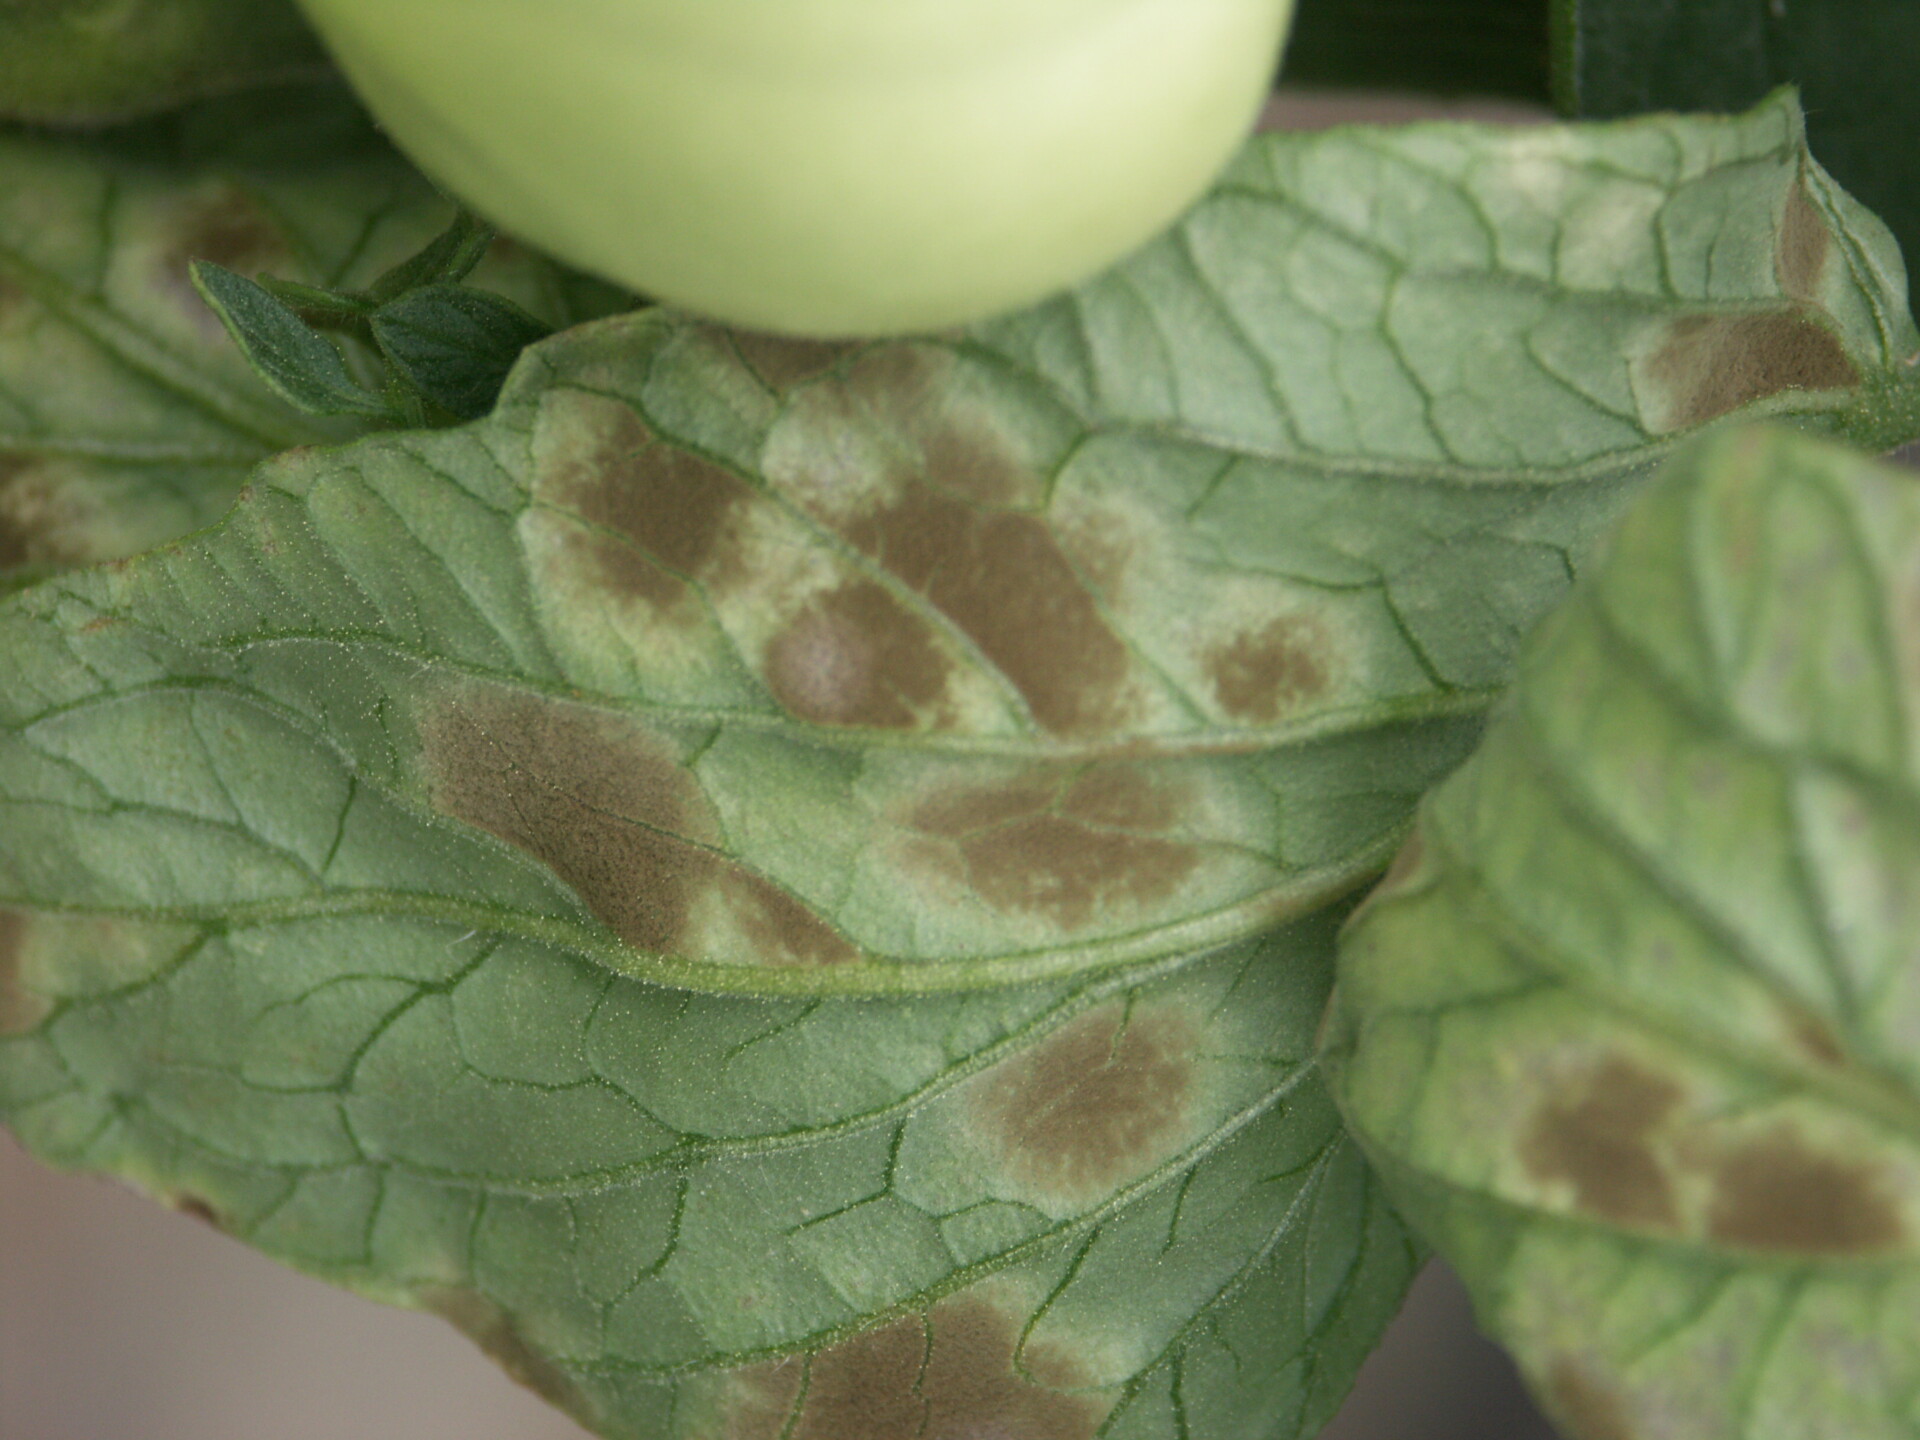 Figure 8. Underside of leaf with sporulation of causal fungus visible for tomato leaf mold.